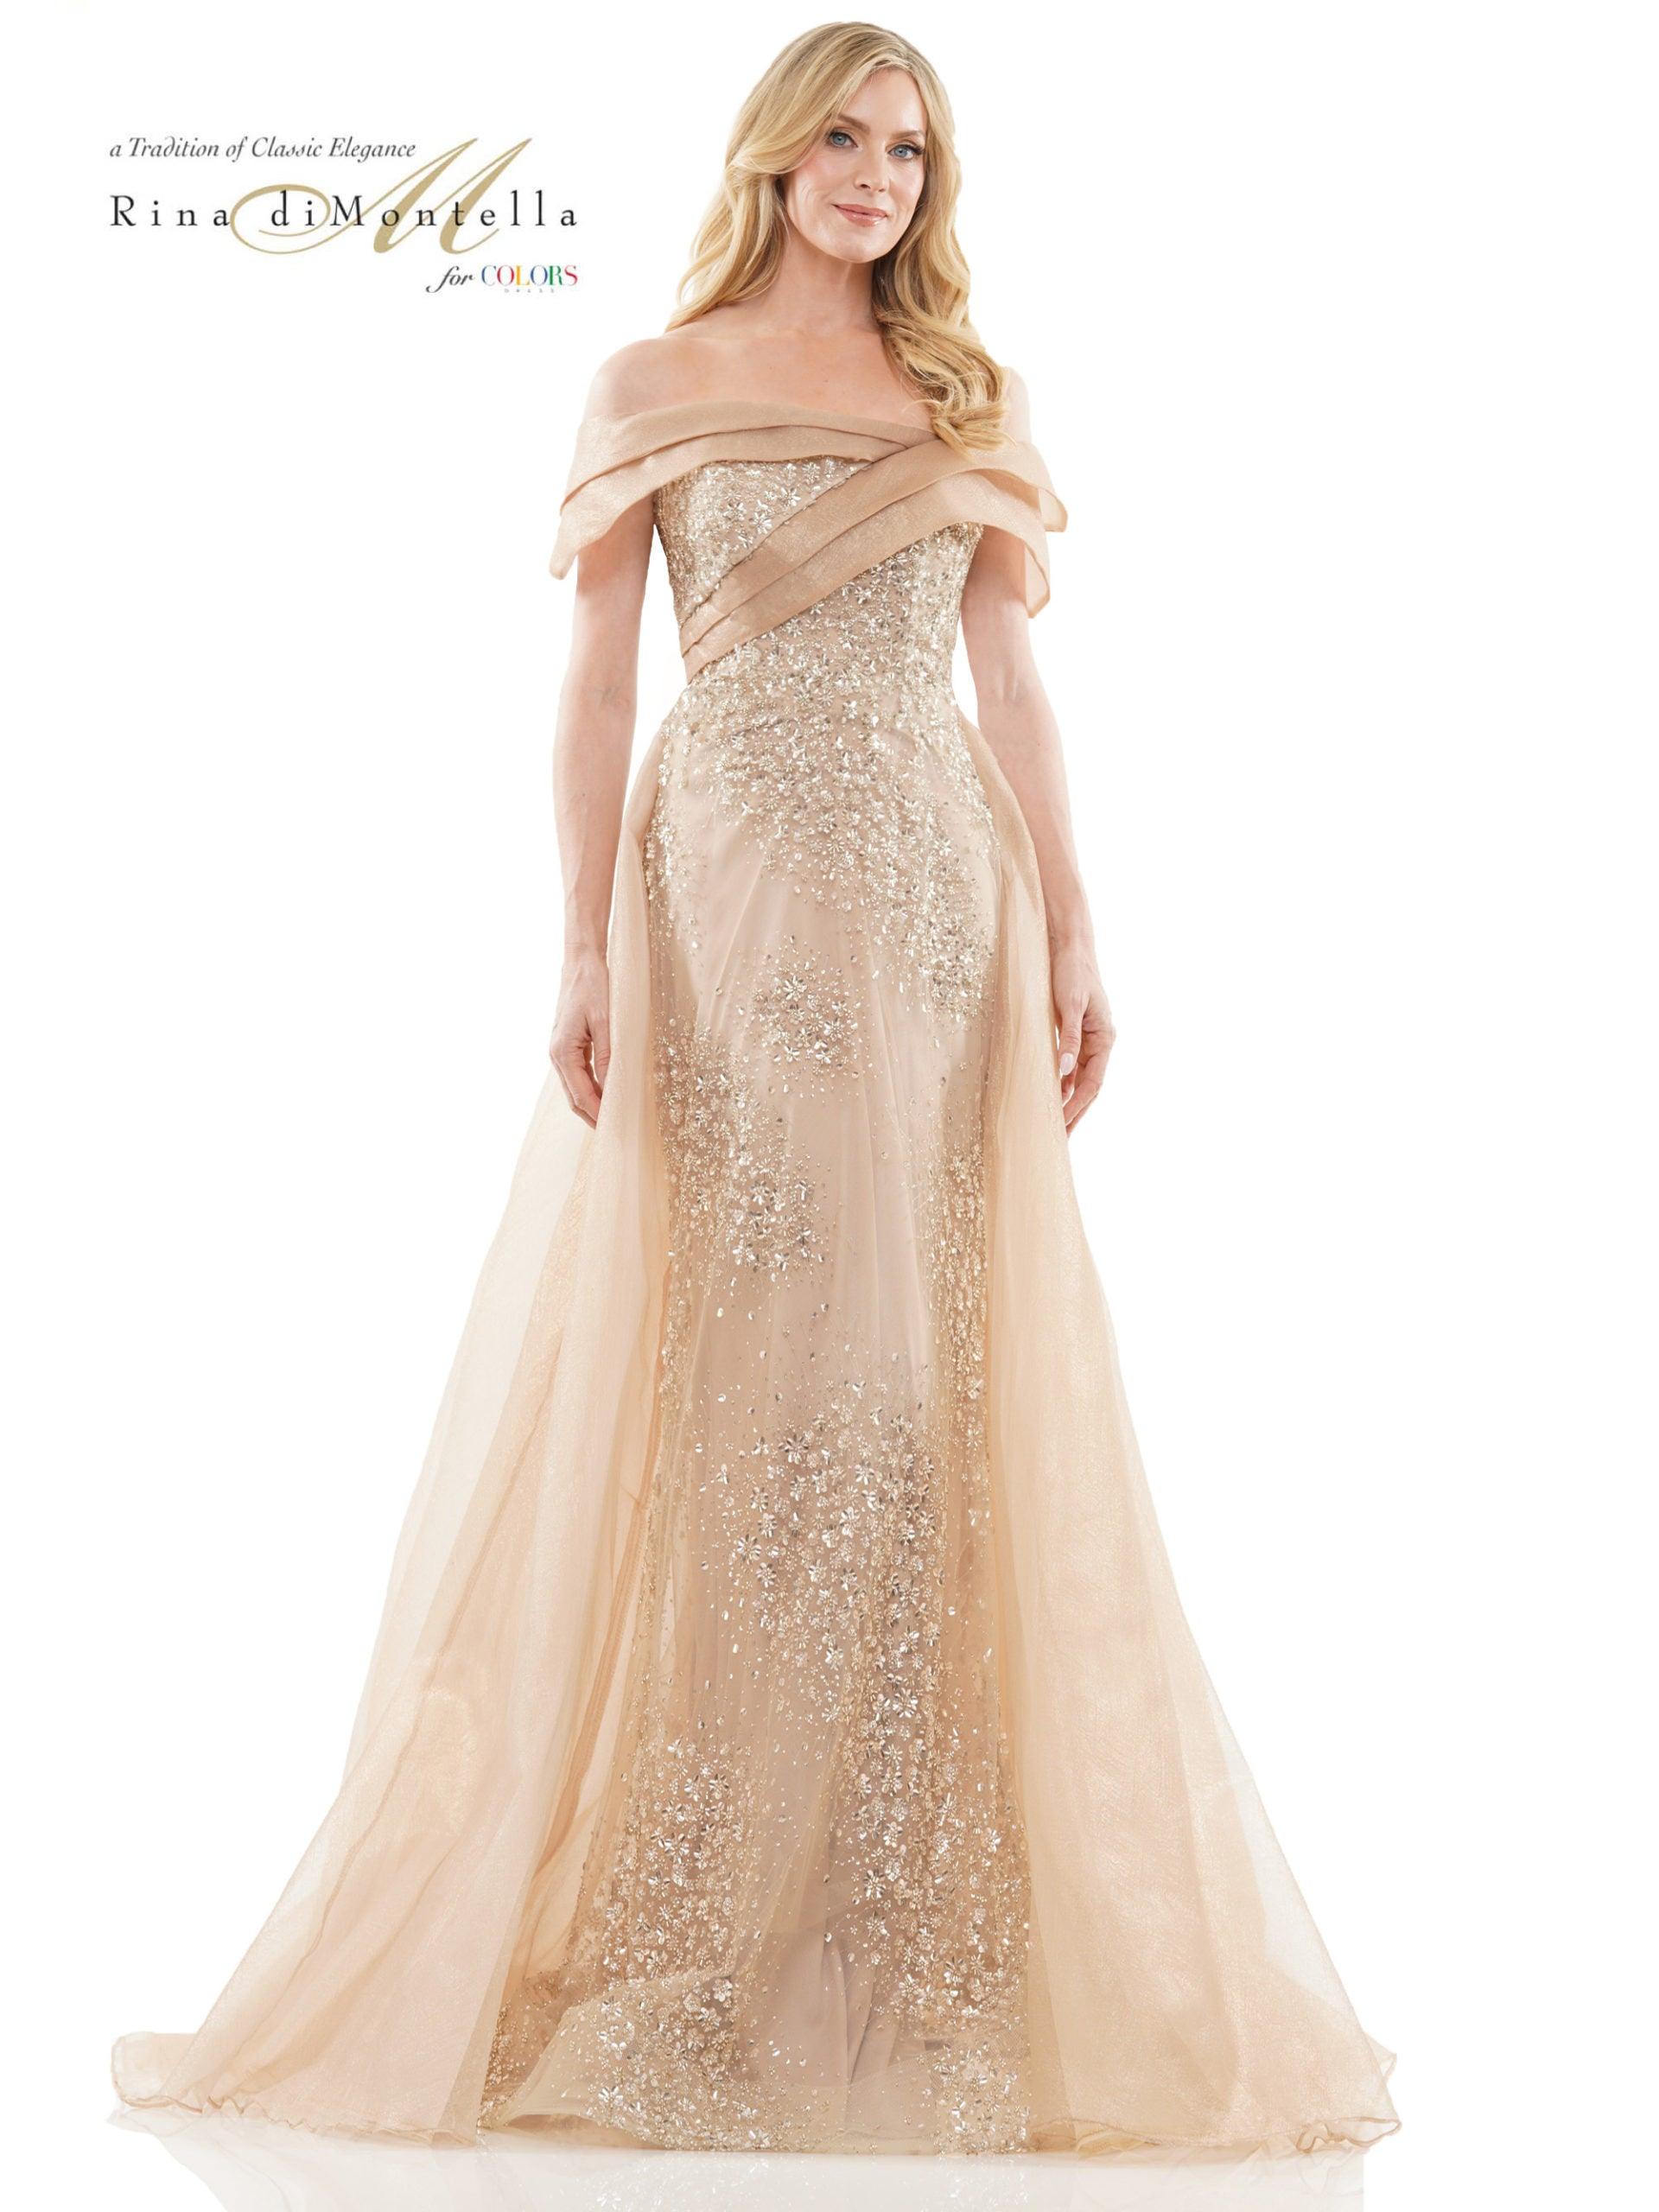 Coffee Rina di Montella Long Formal Off Shoulder Gown 2816 for $811.99 –  The Dress Outlet